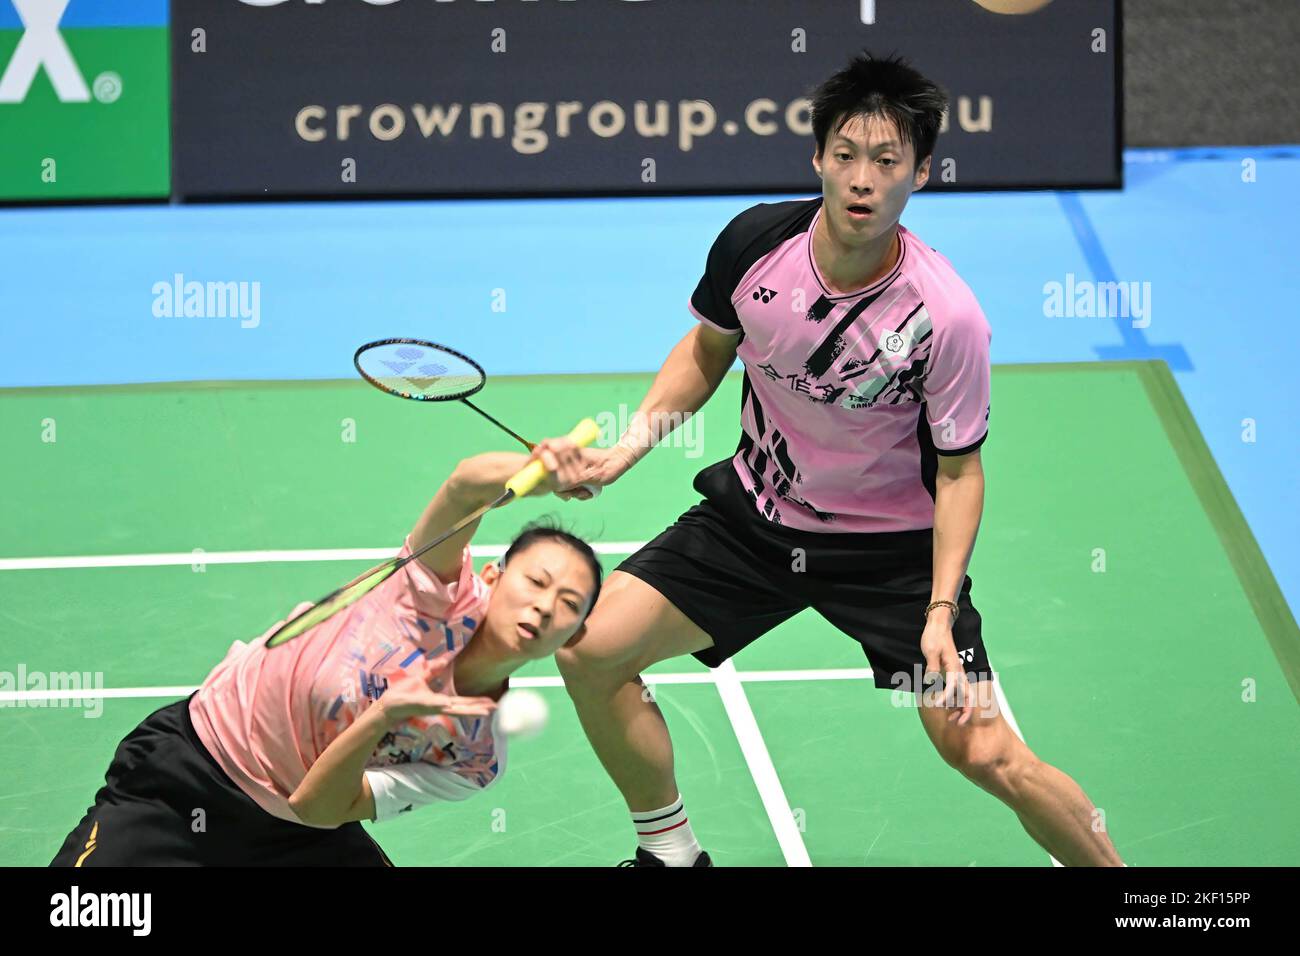 Sydney, Australia. 15th Nov, 2022. Yang Po-Hsuan (back) and Hu Ling Fang (front) of Chinese Taipei seen in action during the 2022 SATHIO GROUP Australian Badminton Open mixed doubles match against Kyohei Yamashita and Natsu Saito of Japan. Yang and Hu won the match, 17-21, 21-19, 21-12. (Photo by Luis Veniegra/SOPA Images/Sipa USA) Credit: Sipa USA/Alamy Live News Stock Photo